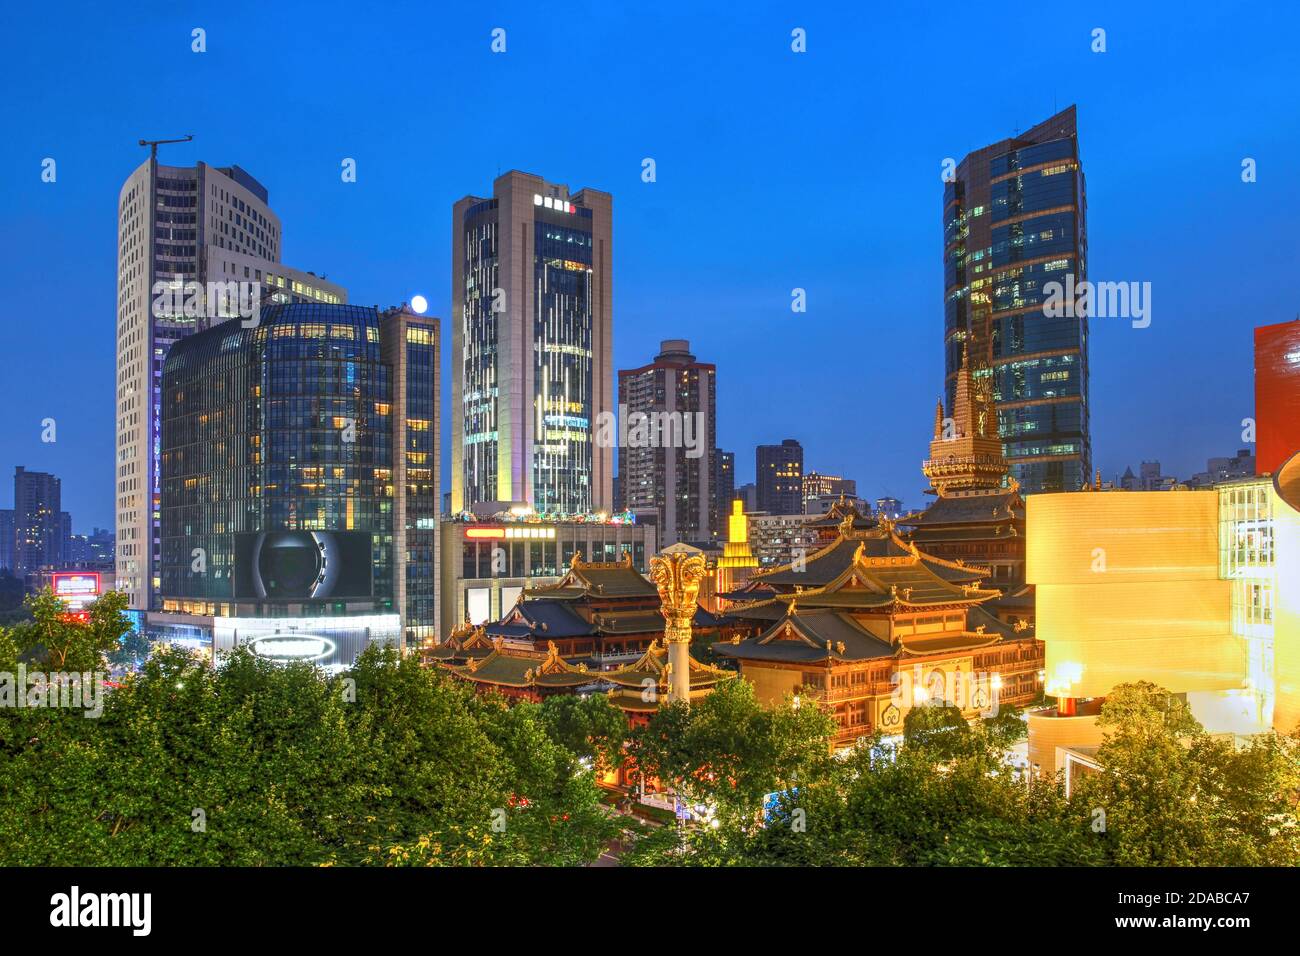 Night view of Shanghai skyline featuring the Jing'an Buddhist Temple and the surrounding skyscrappers in China. Stock Photo